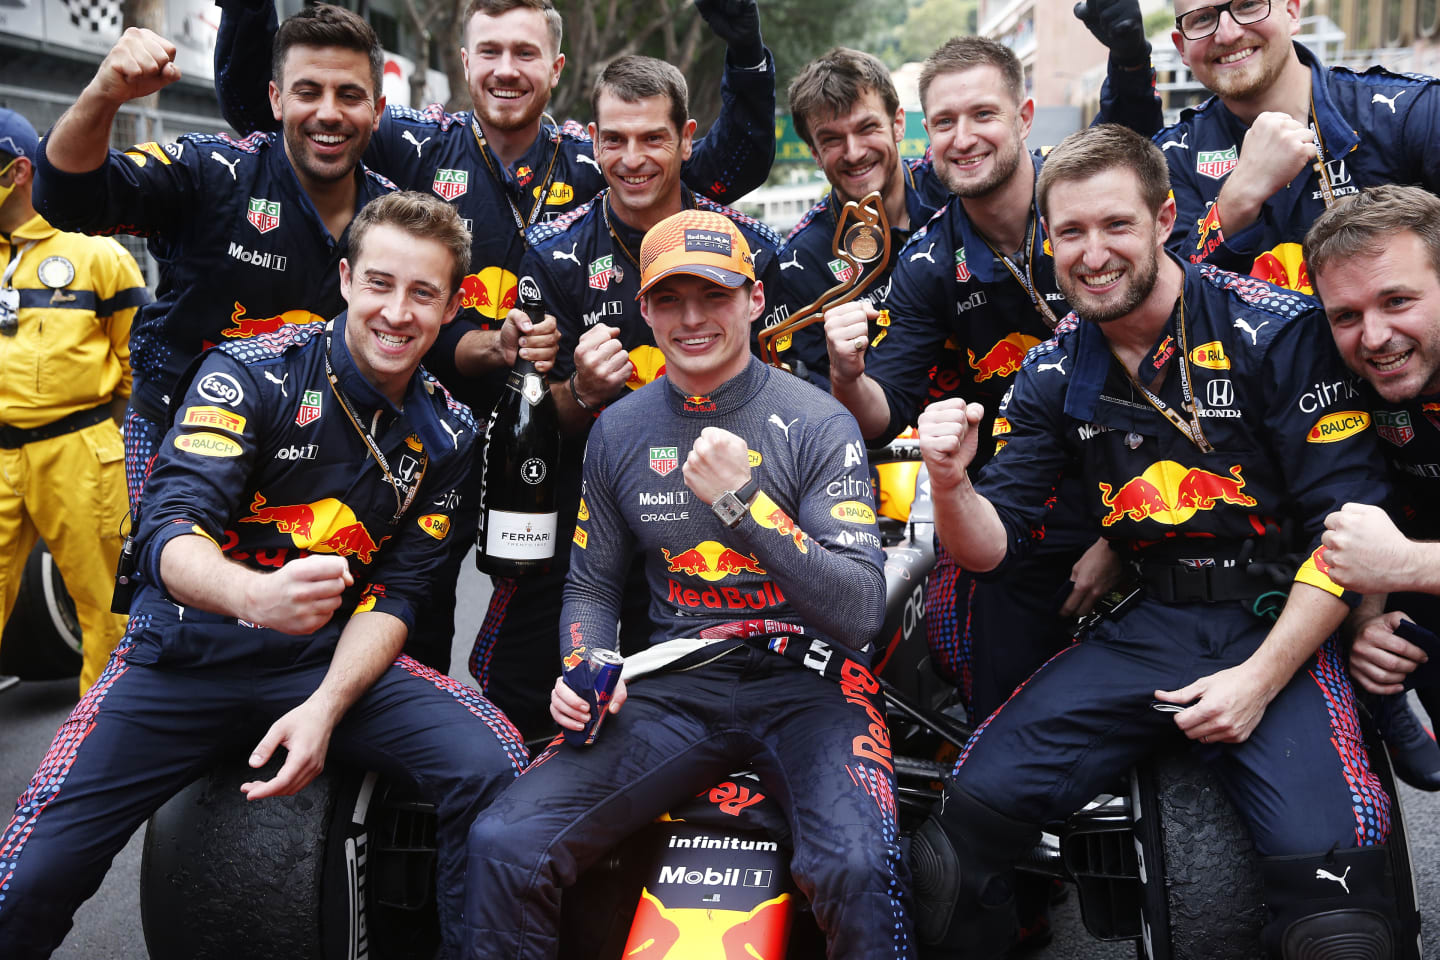 MONTE-CARLO, MONACO - MAY 23: Race winner Max Verstappen of Netherlands and Red Bull Racing celebrates with his team in parc ferme during the F1 Grand Prix of Monaco at Circuit de Monaco on May 23, 2021 in Monte-Carlo, Monaco. (Photo by Sebastian Nogier - Pool/Getty Images)